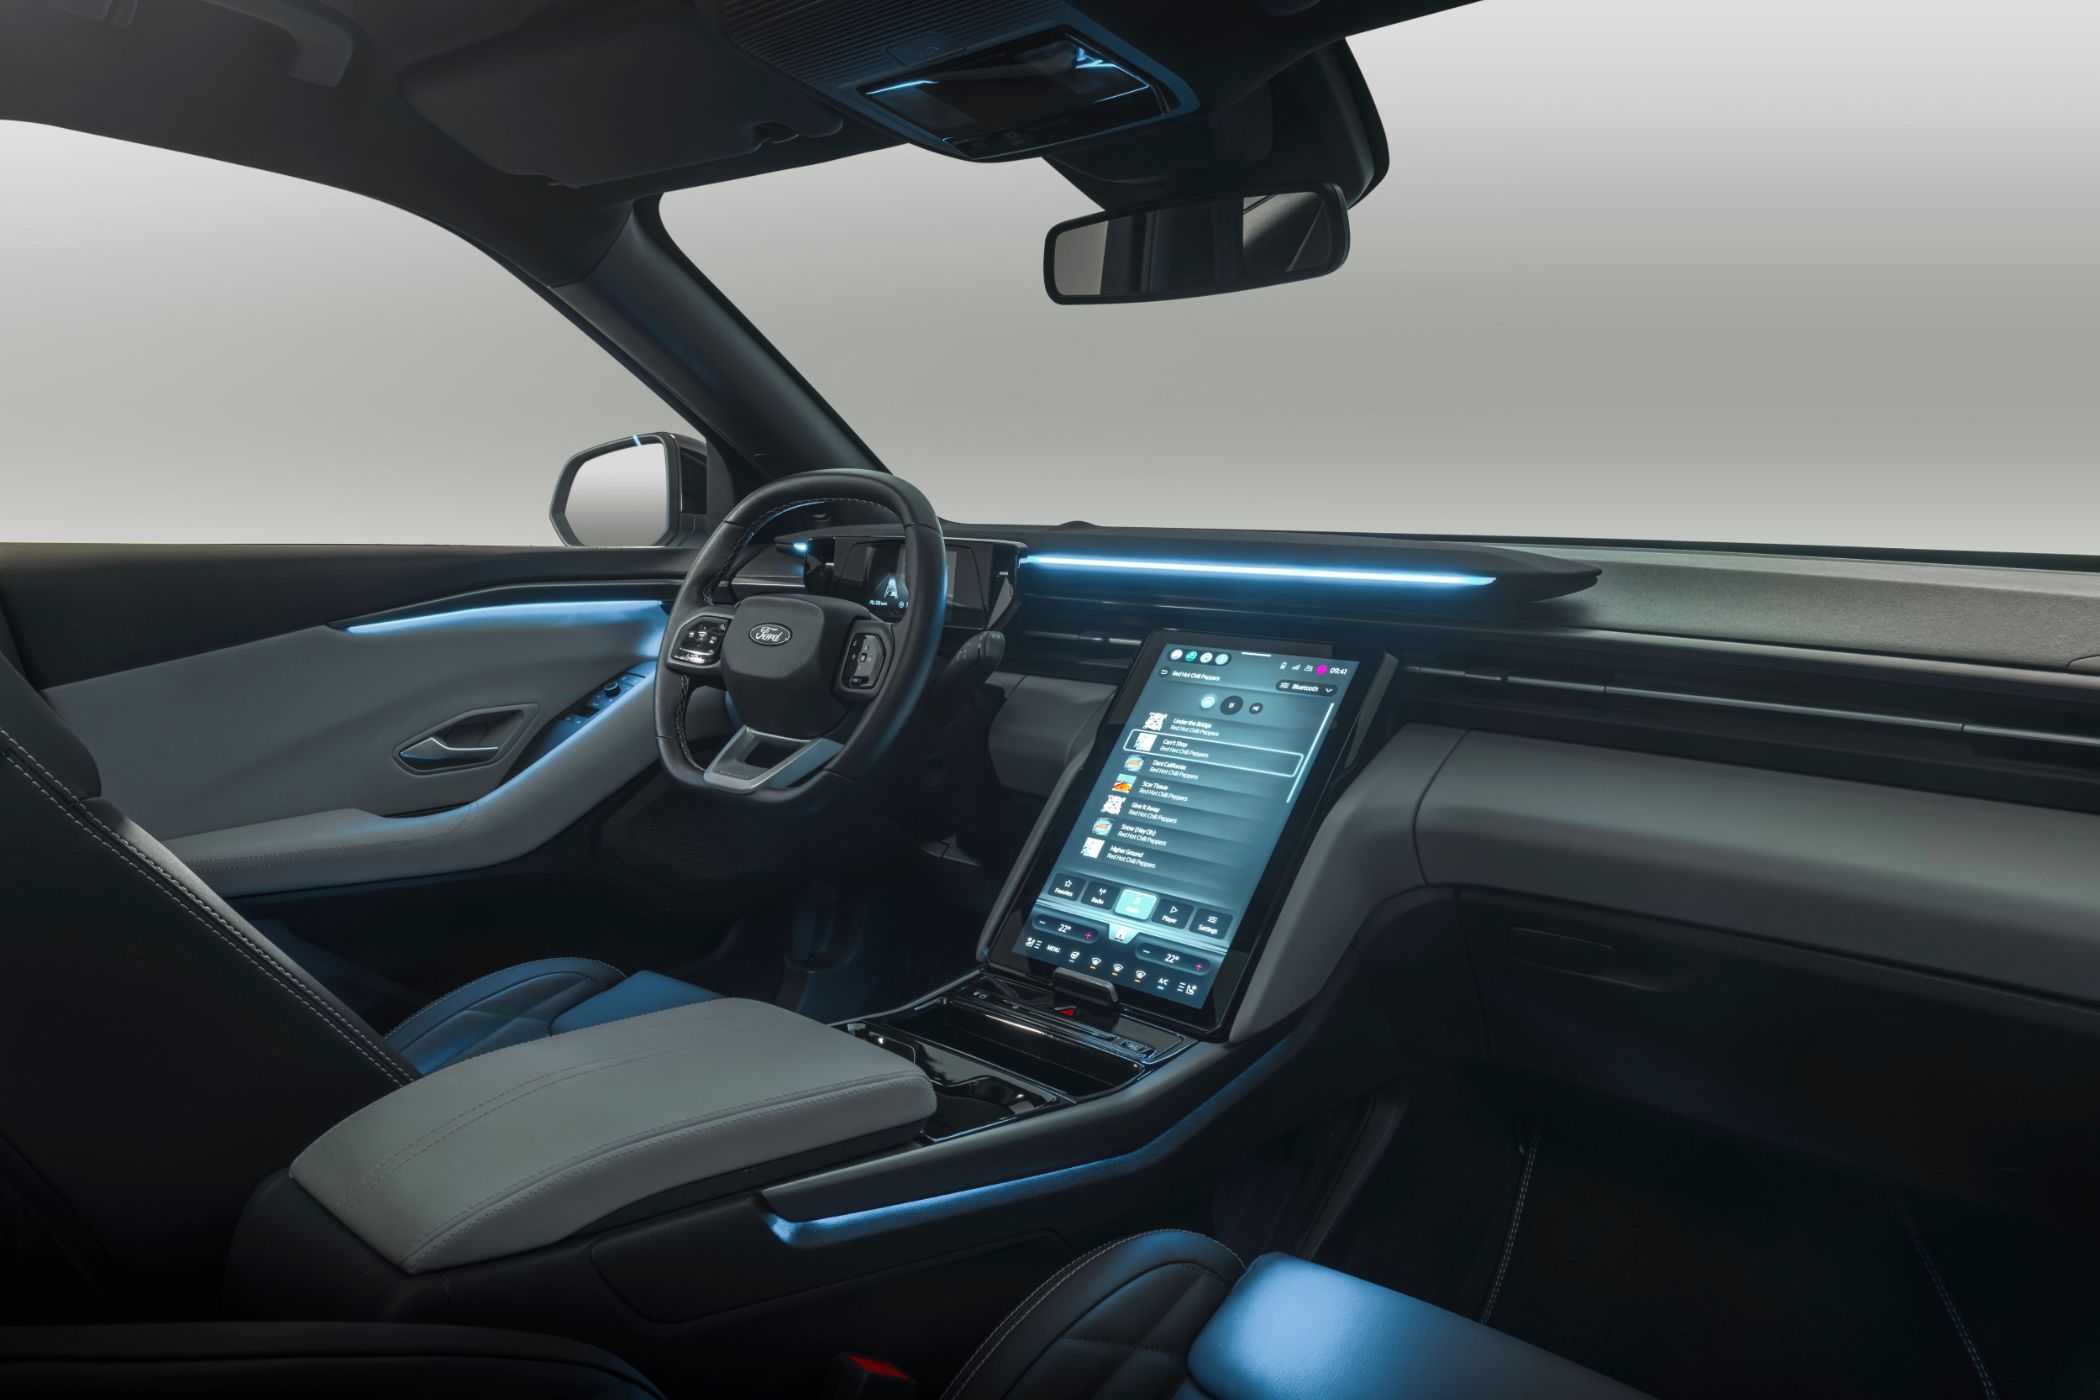 Interior view of the new Ford Explorer EV